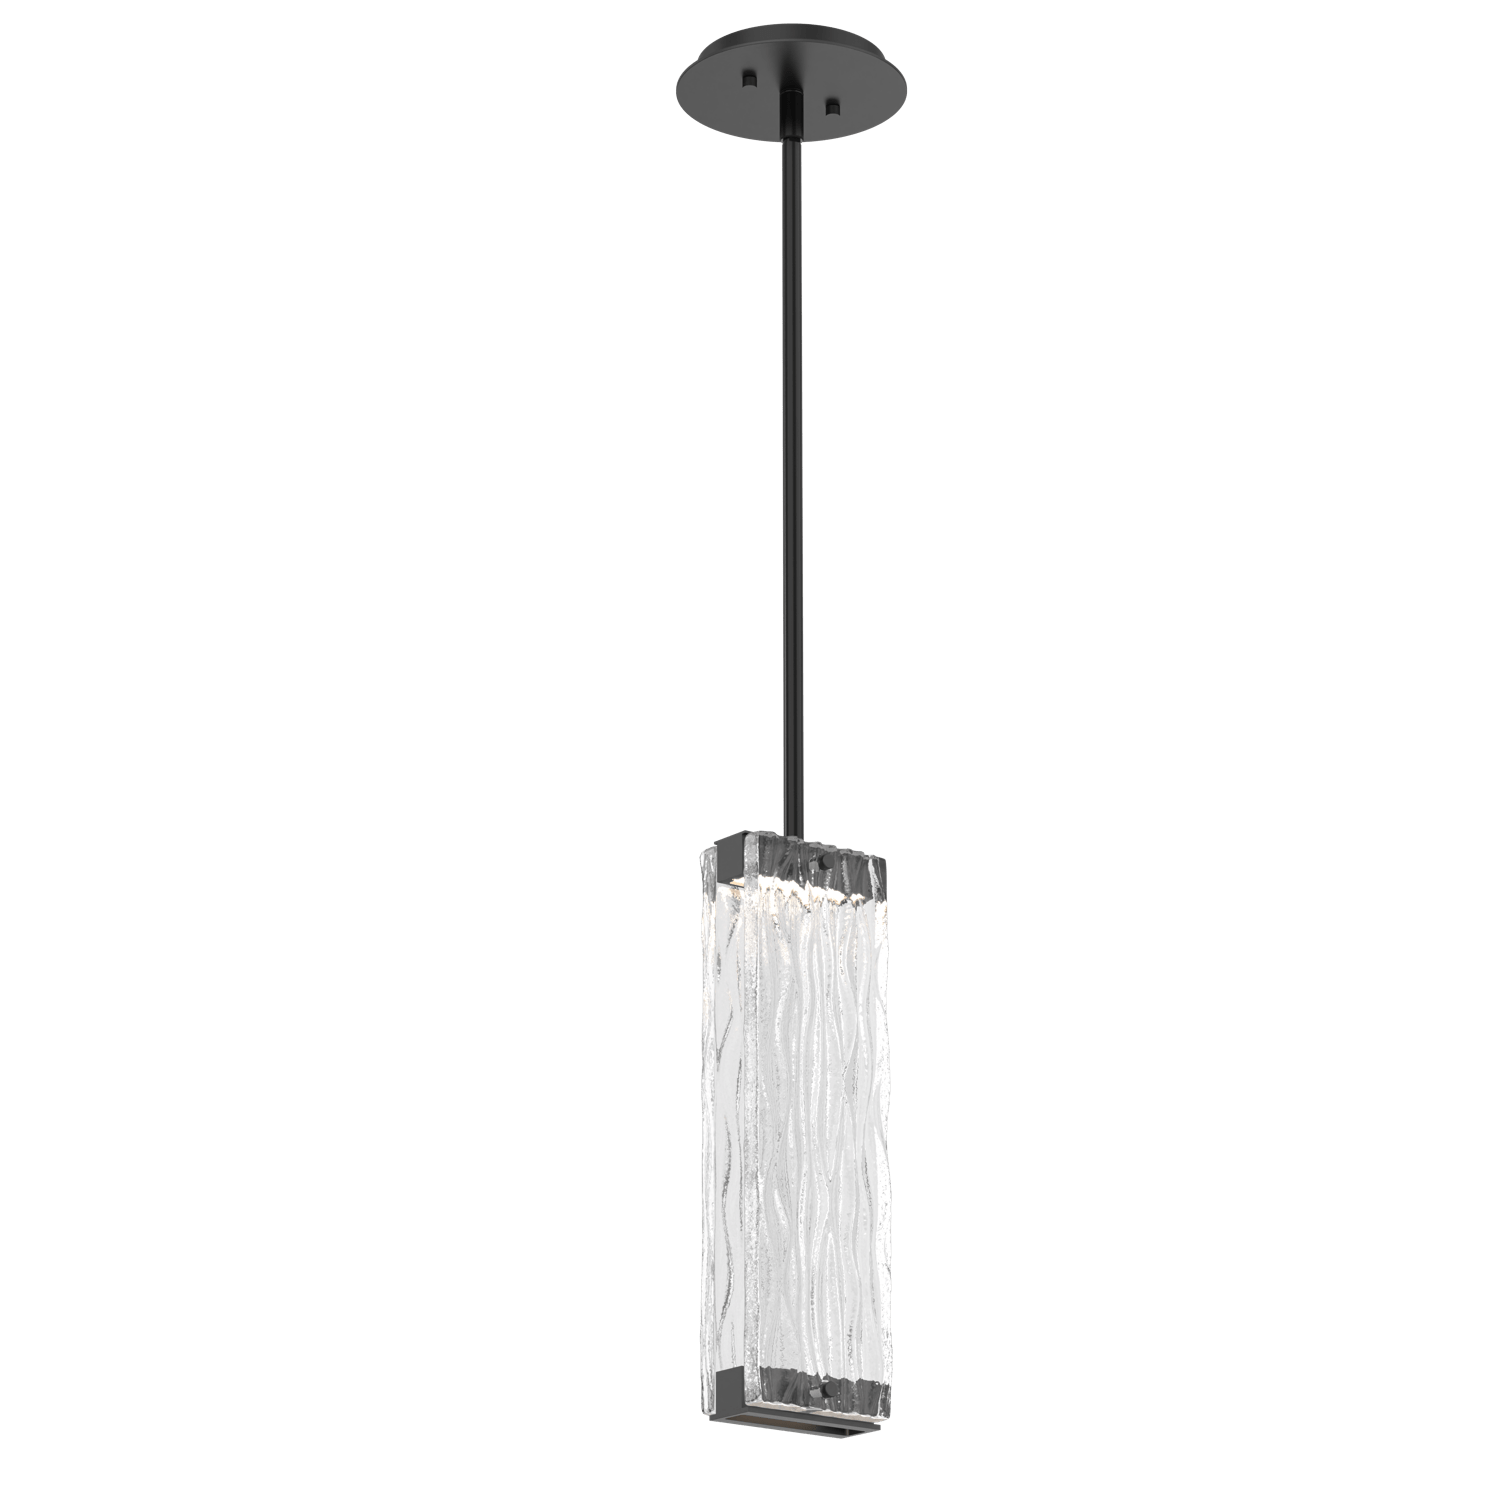 LAB0090-01-MB-TT-Hammerton-Studio-Tabulo-pendant-light-with-matte-black-finish-and-clear-tidal-cast-glass-shade-and-LED-lamping